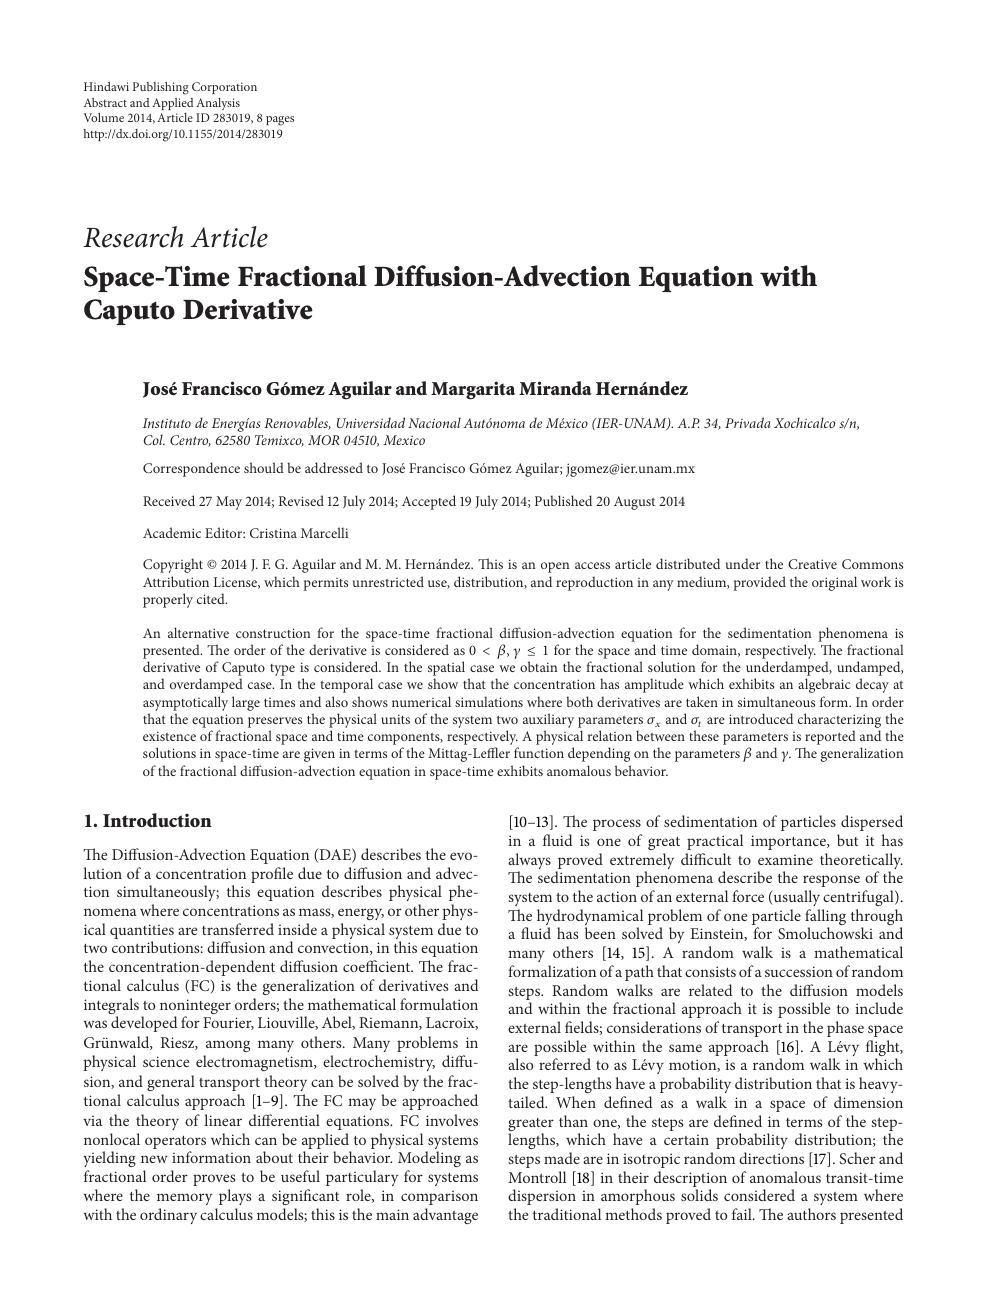 Space Time Fractional Diffusion Advection Equation With Caputo Derivative Topic Of Research Paper In Mathematics Download Scholarly Article Pdf And Read For Free On Cyberleninka Open Science Hub